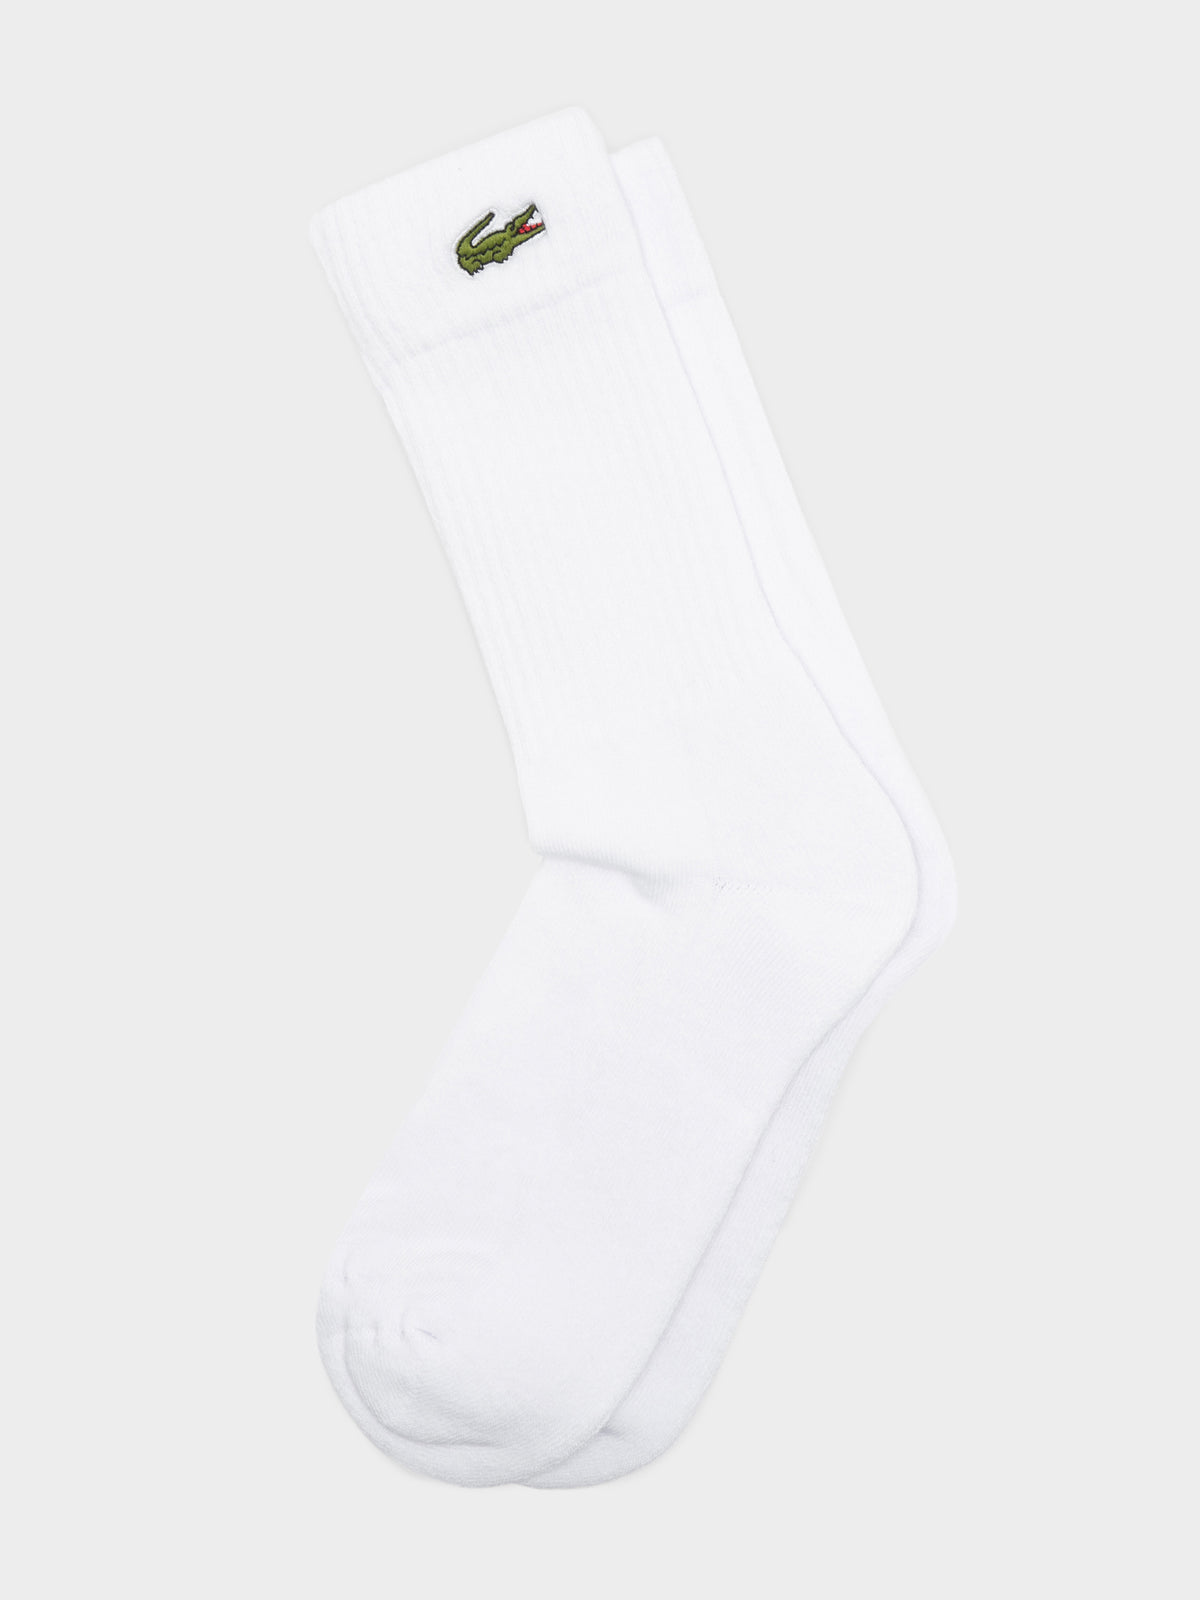 One Pair of Lacoste Crew Socks in White